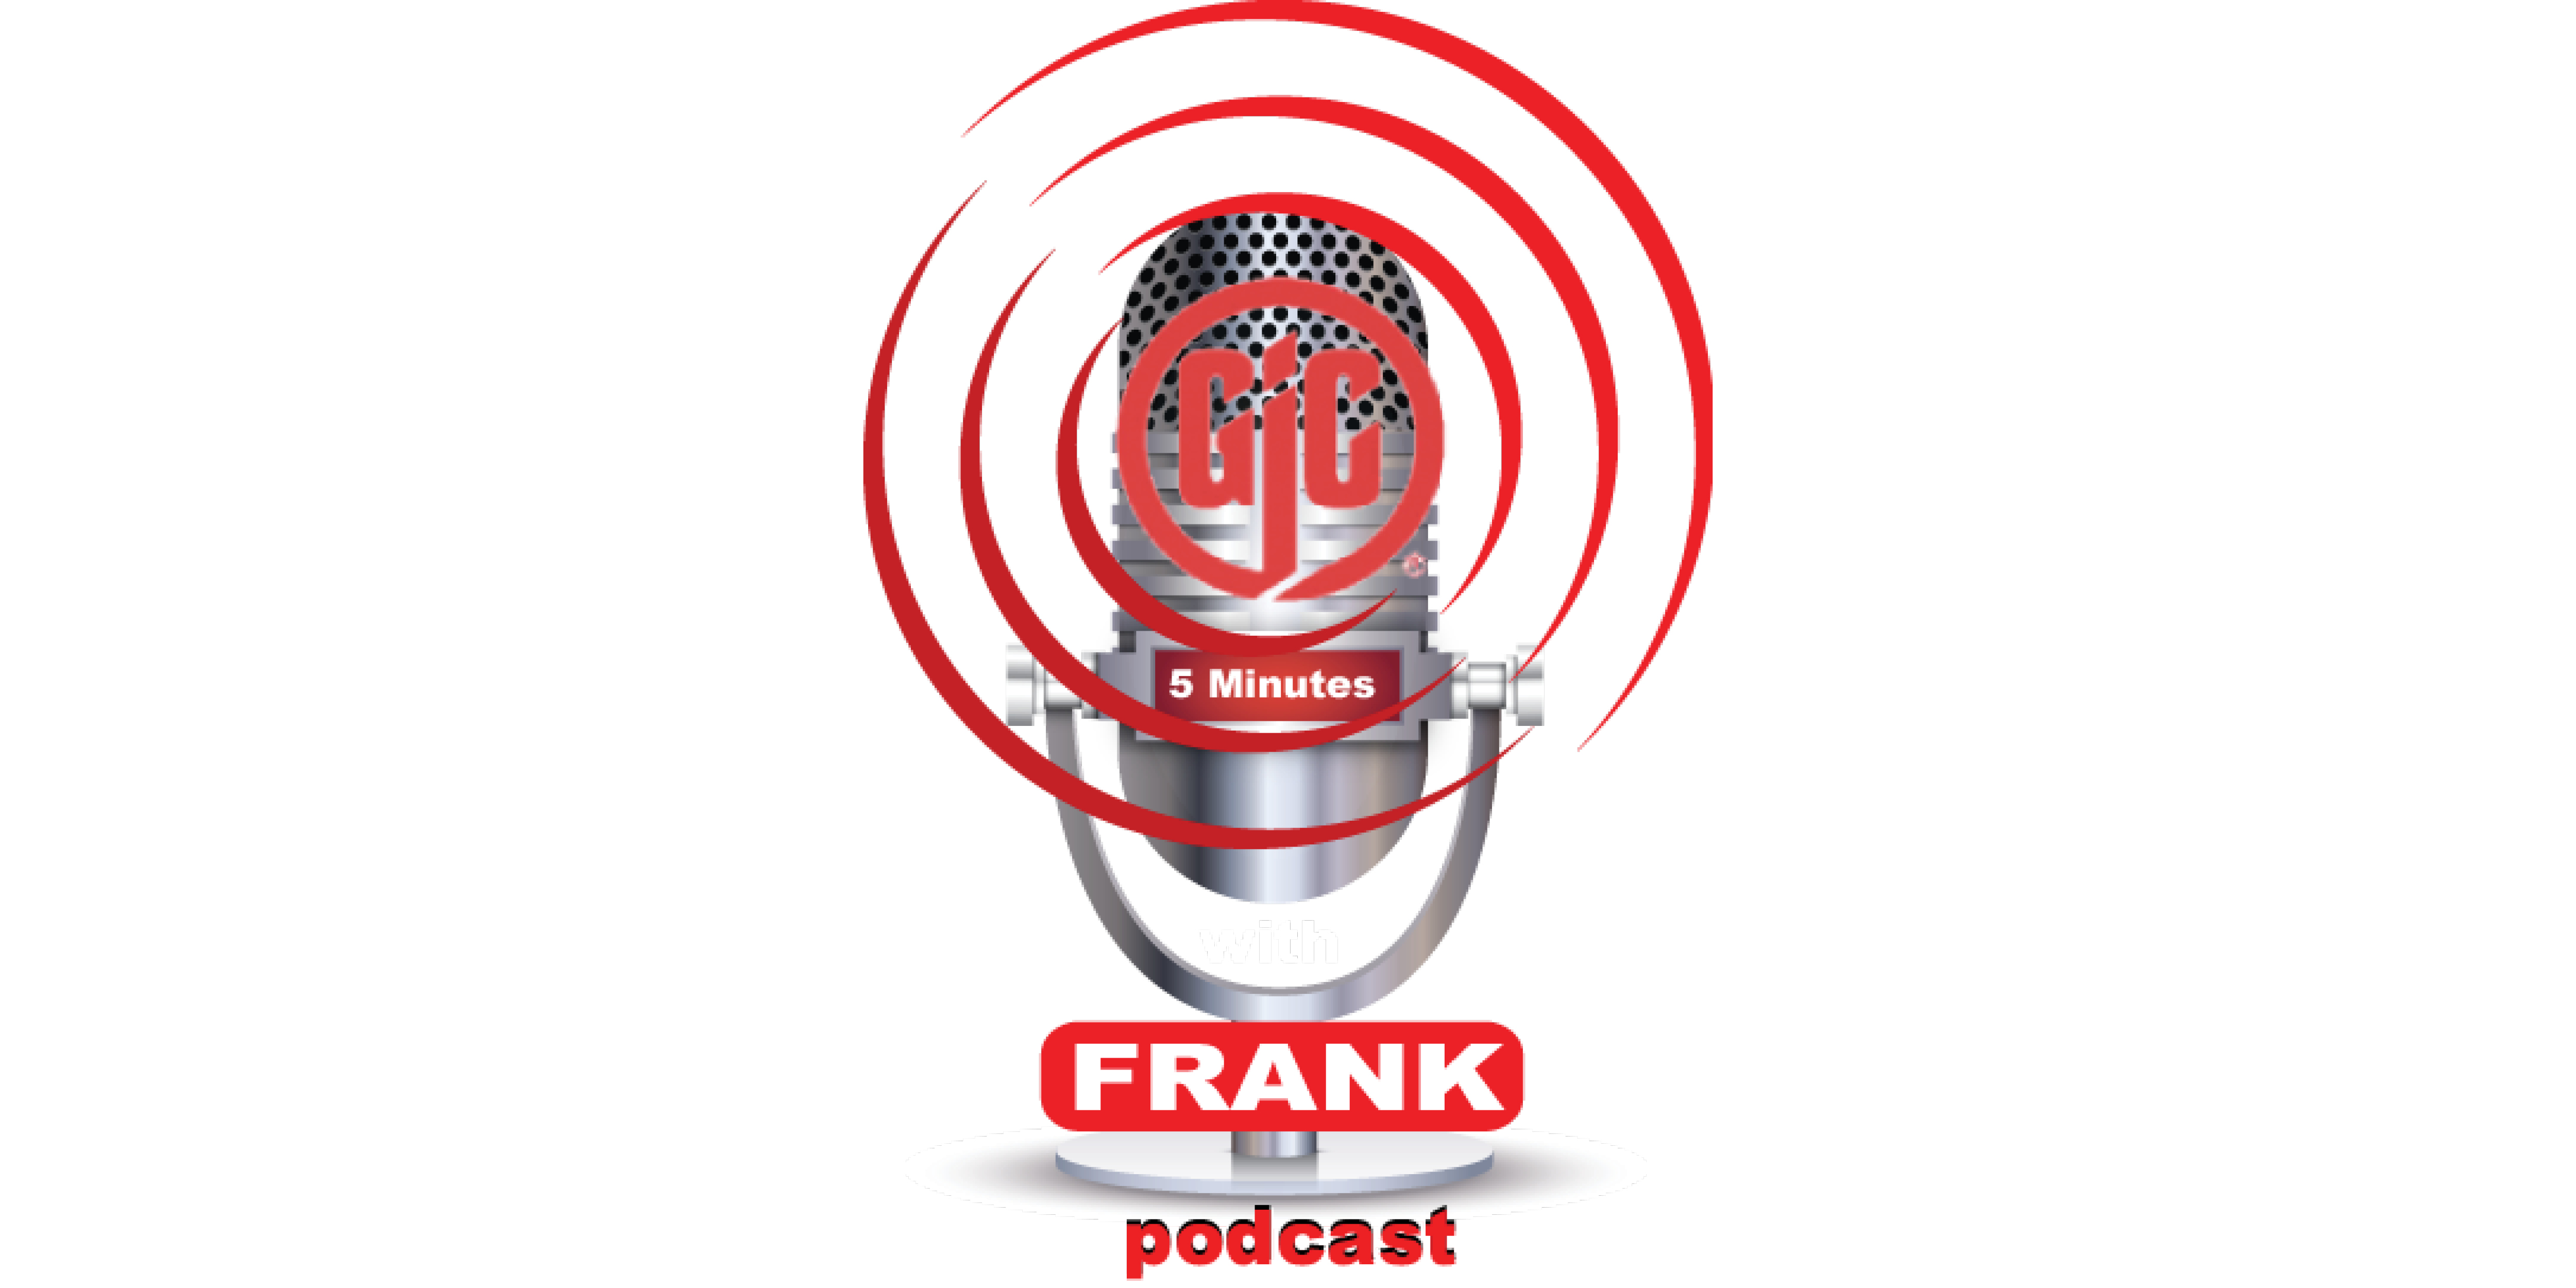 5 Minutes With Frank Episode 3 General Insulation